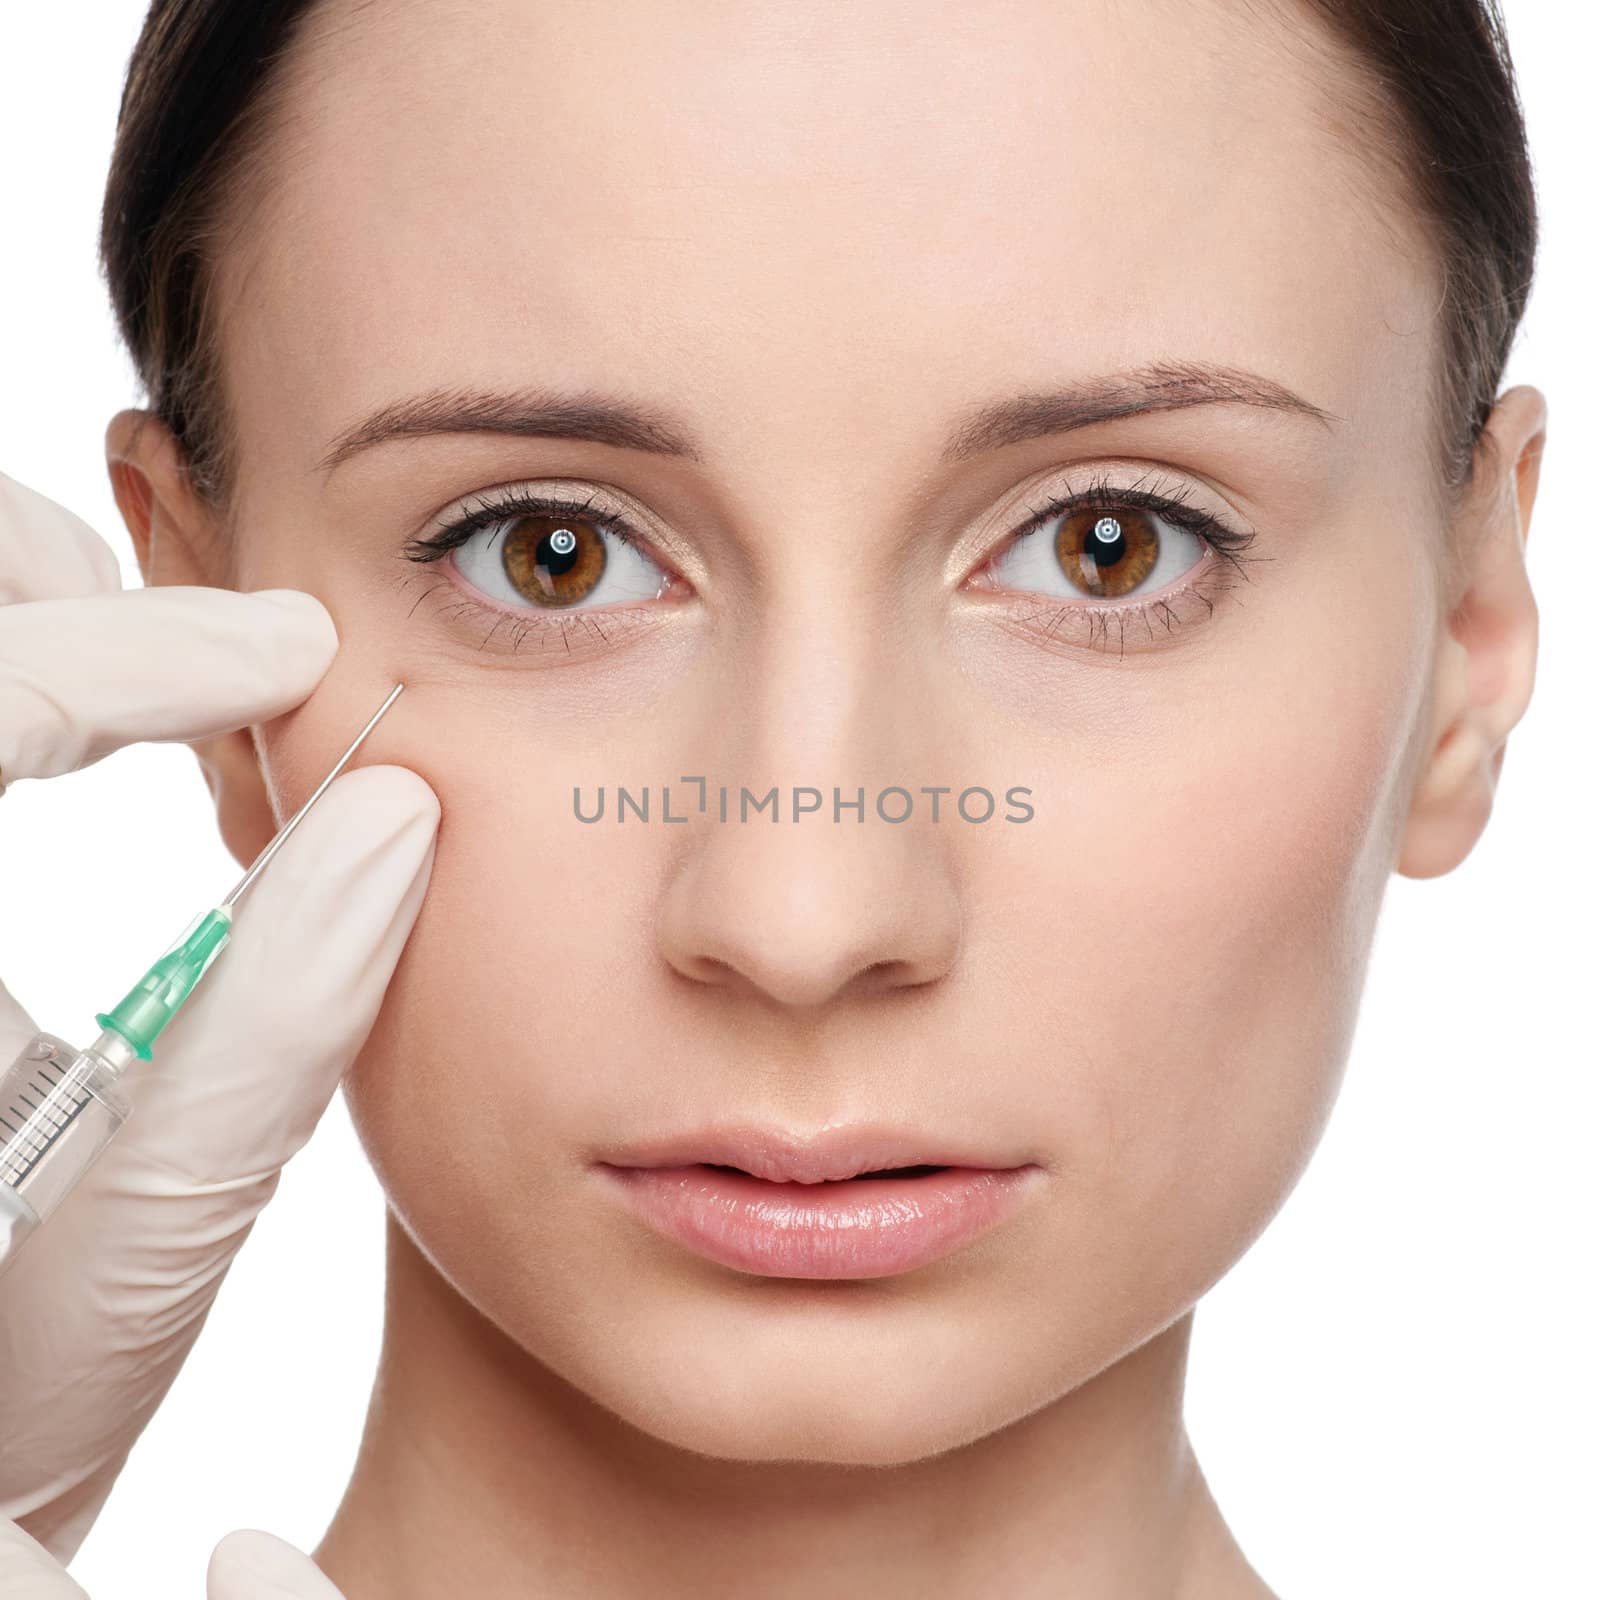 Cosmetic botox injection in the beauty face by markin